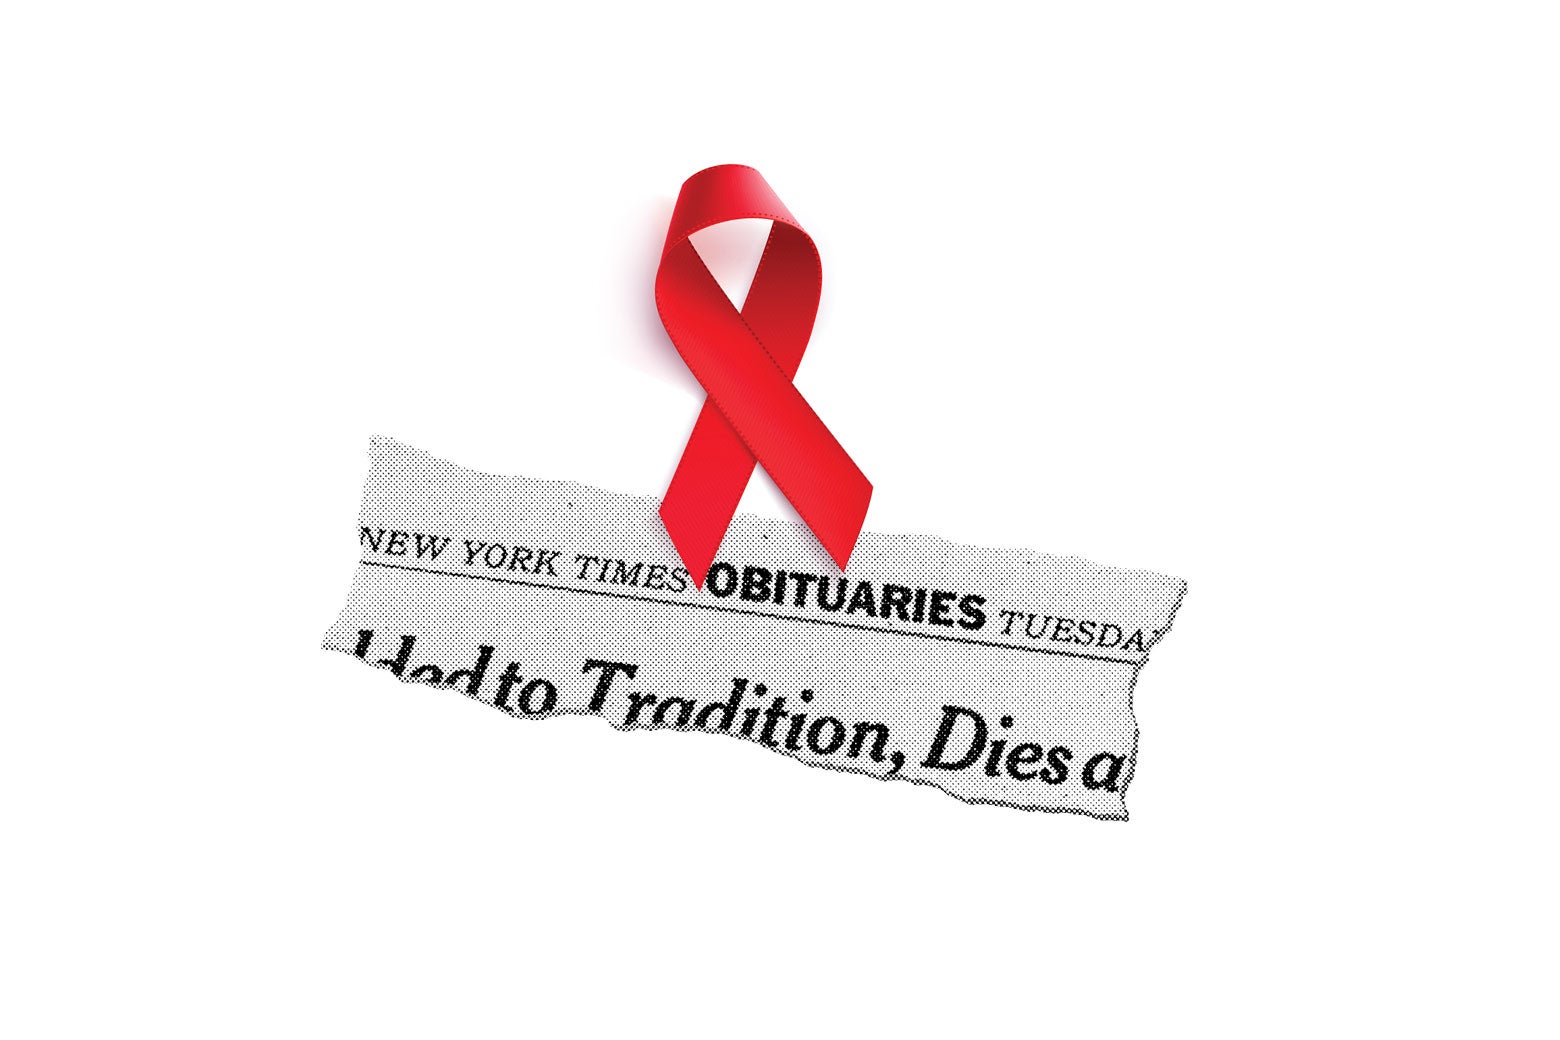 A red AIDS ribbon over a New York Times obit headline.